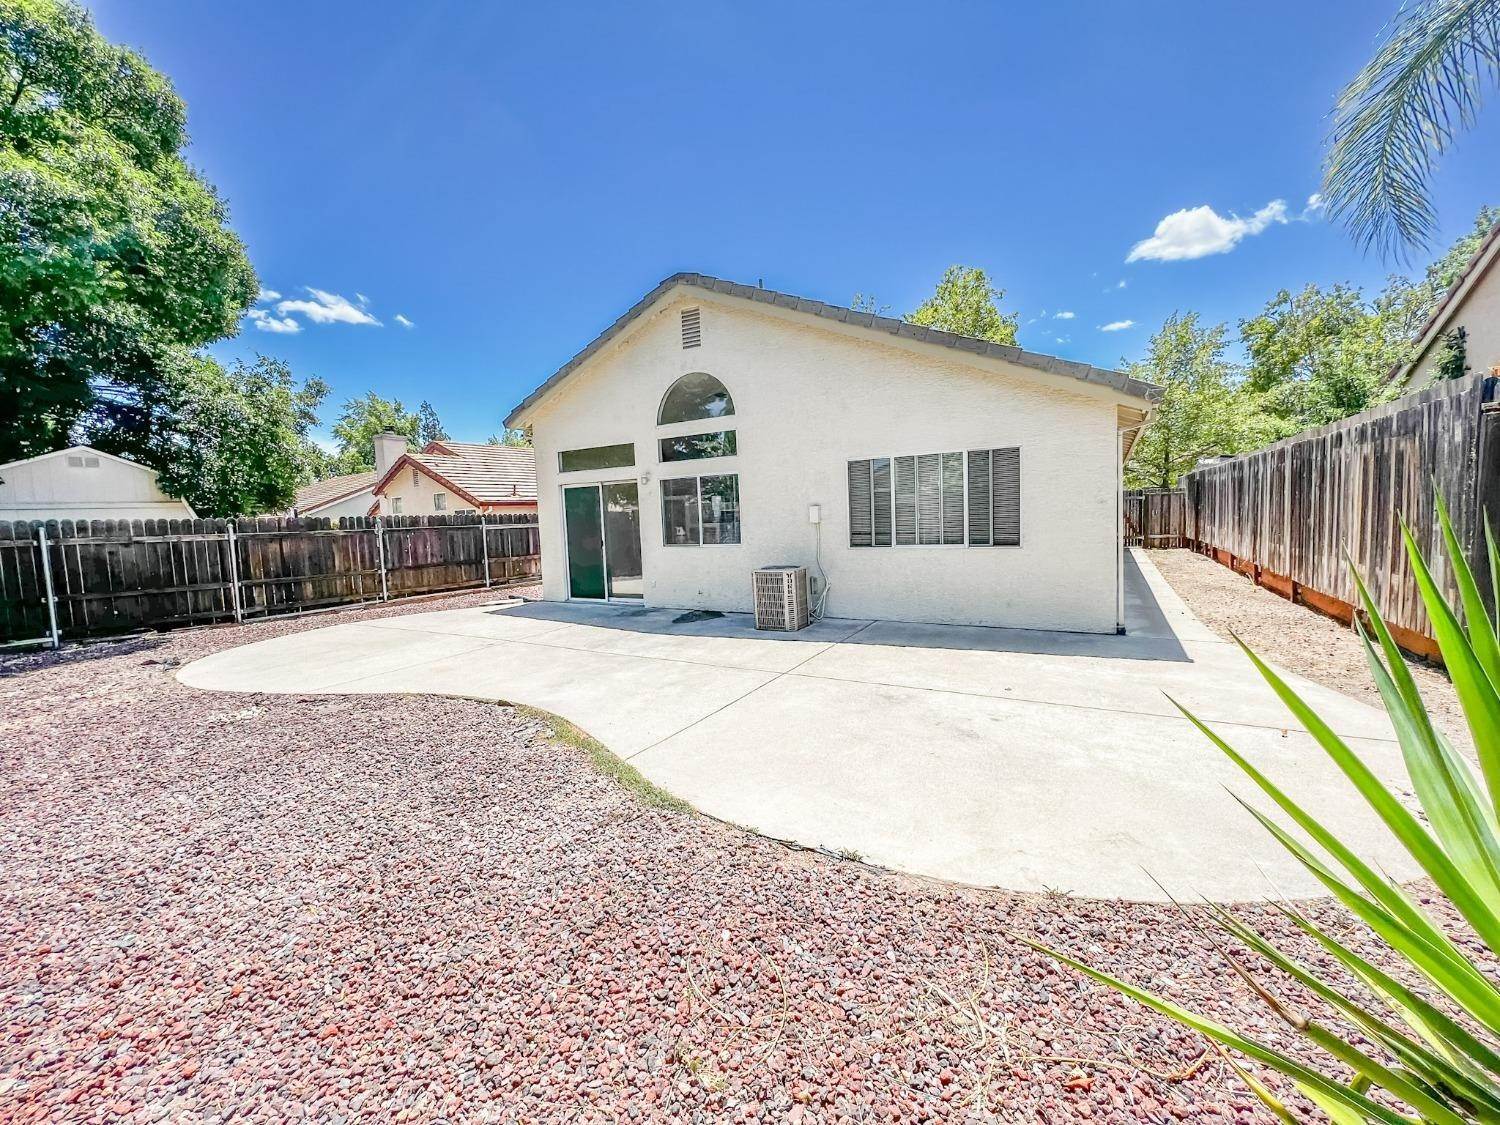 19. Single Family Homes for Active at 3509 Birchdale Way Antelope, California 95843 United States